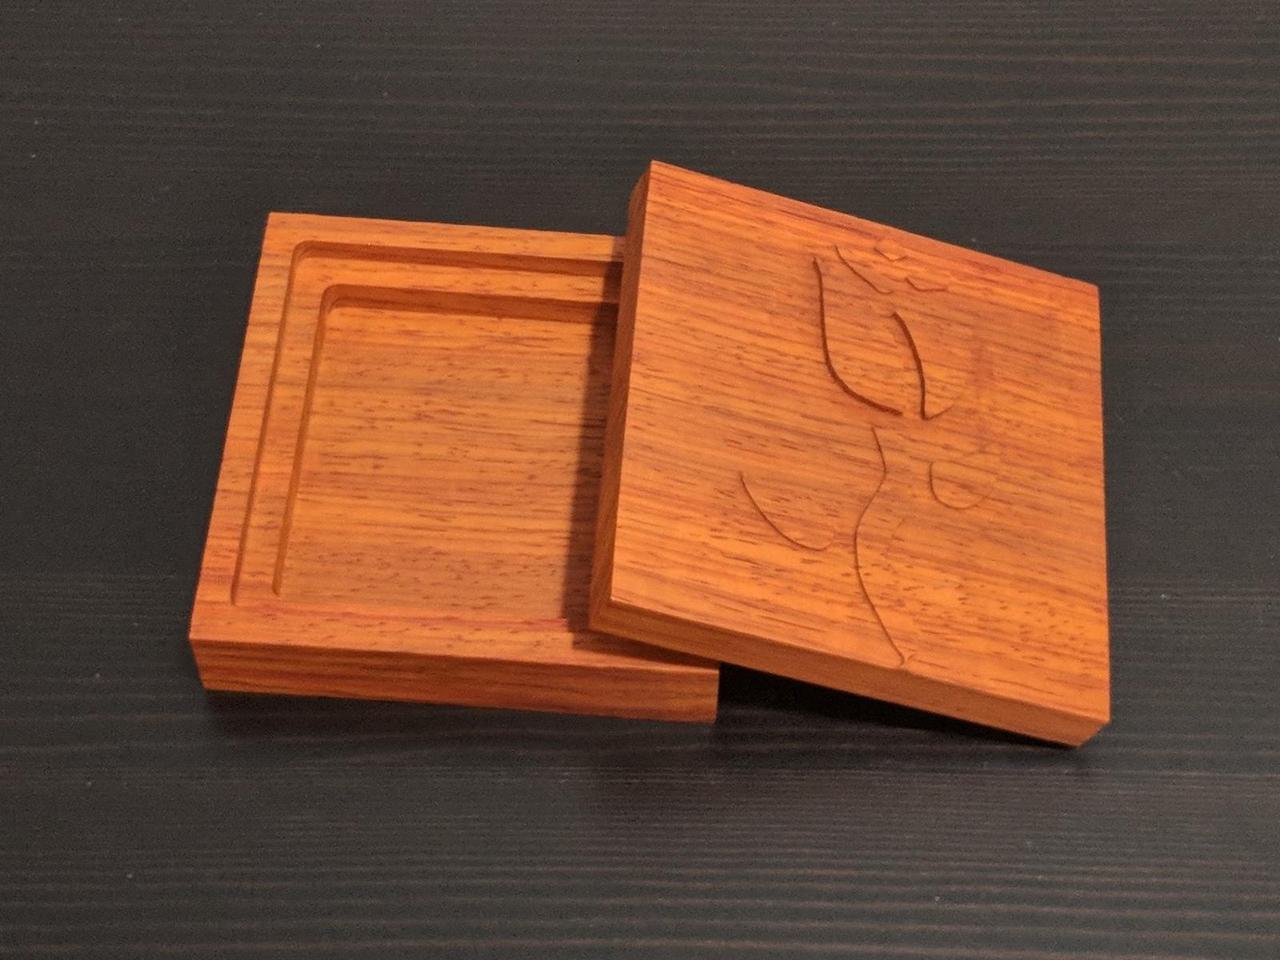 square wooden box with lid leaning on edge of box.